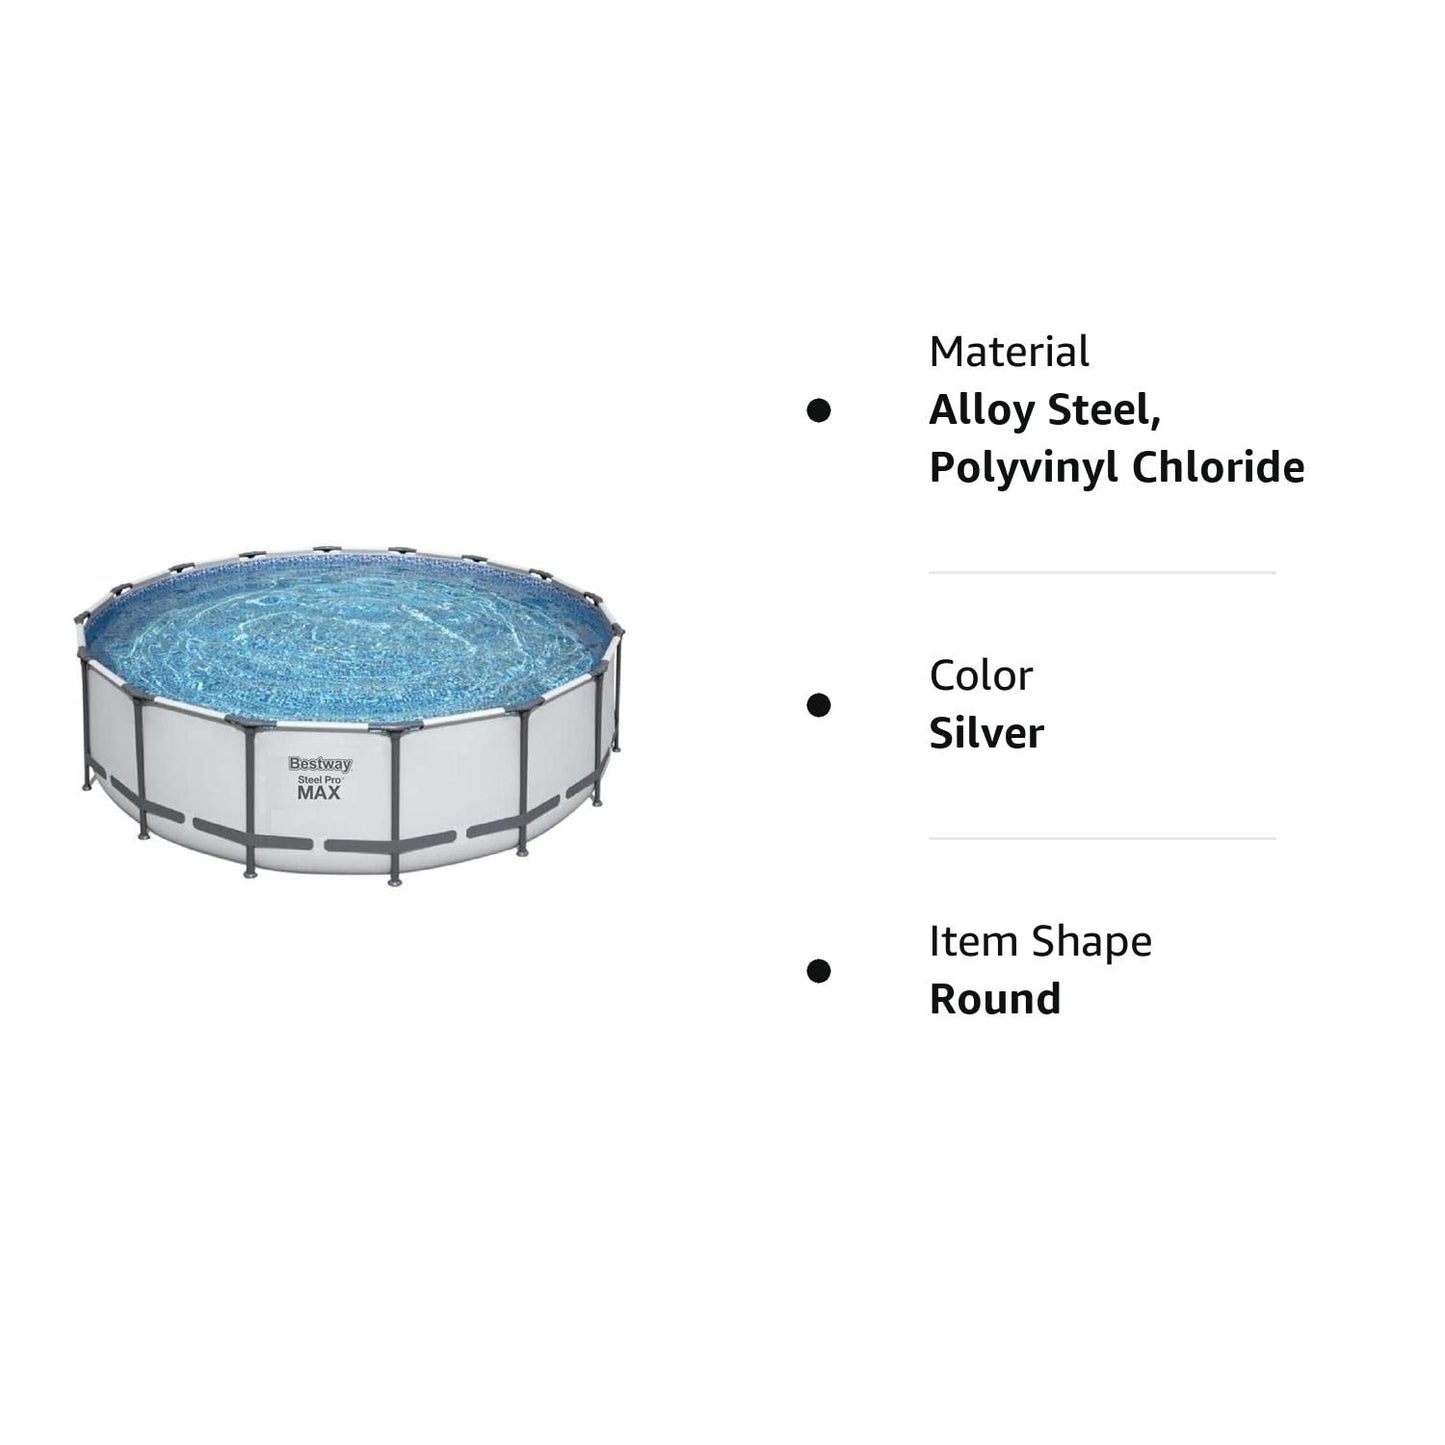 Bestway Steel Pro MAX 16 Foot x 48 Inch Round Metal Frame Above Ground Outdoor Swimming Pool Set